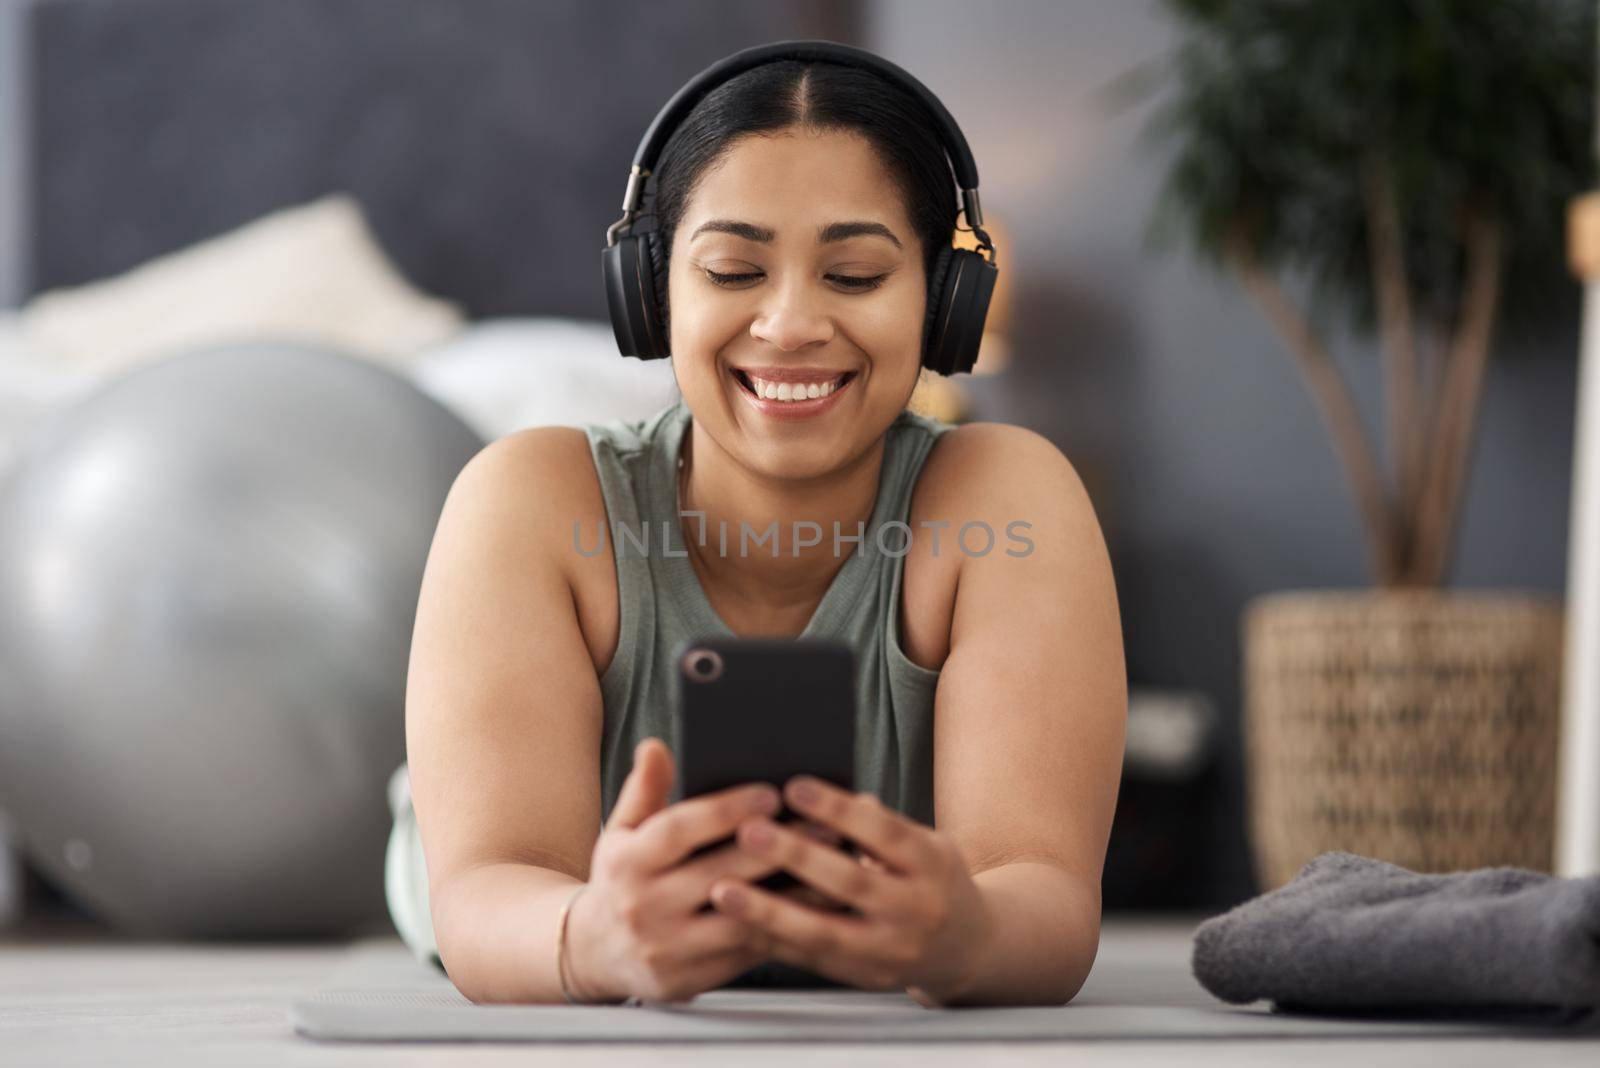 Shot of a sporty young woman wearing headphones and using a cellphone while exercising at home.